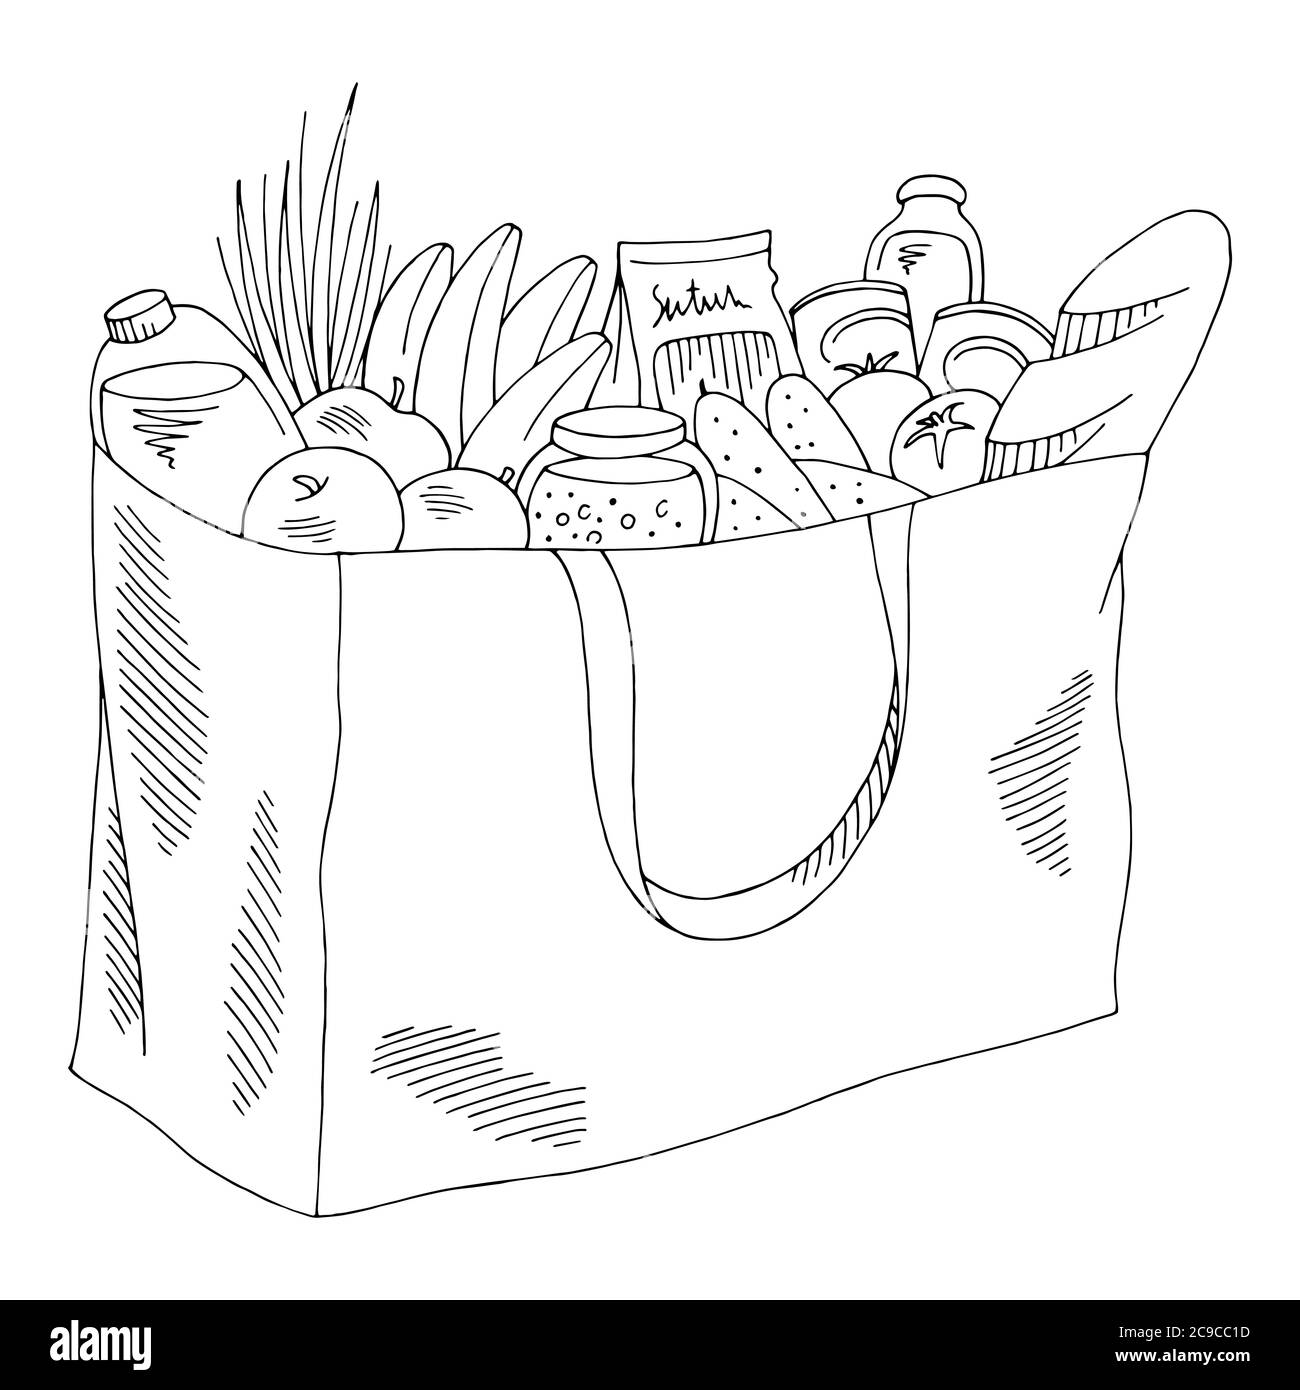 Grocery bag graphic isolated black white sketch illustration vector Stock Vector